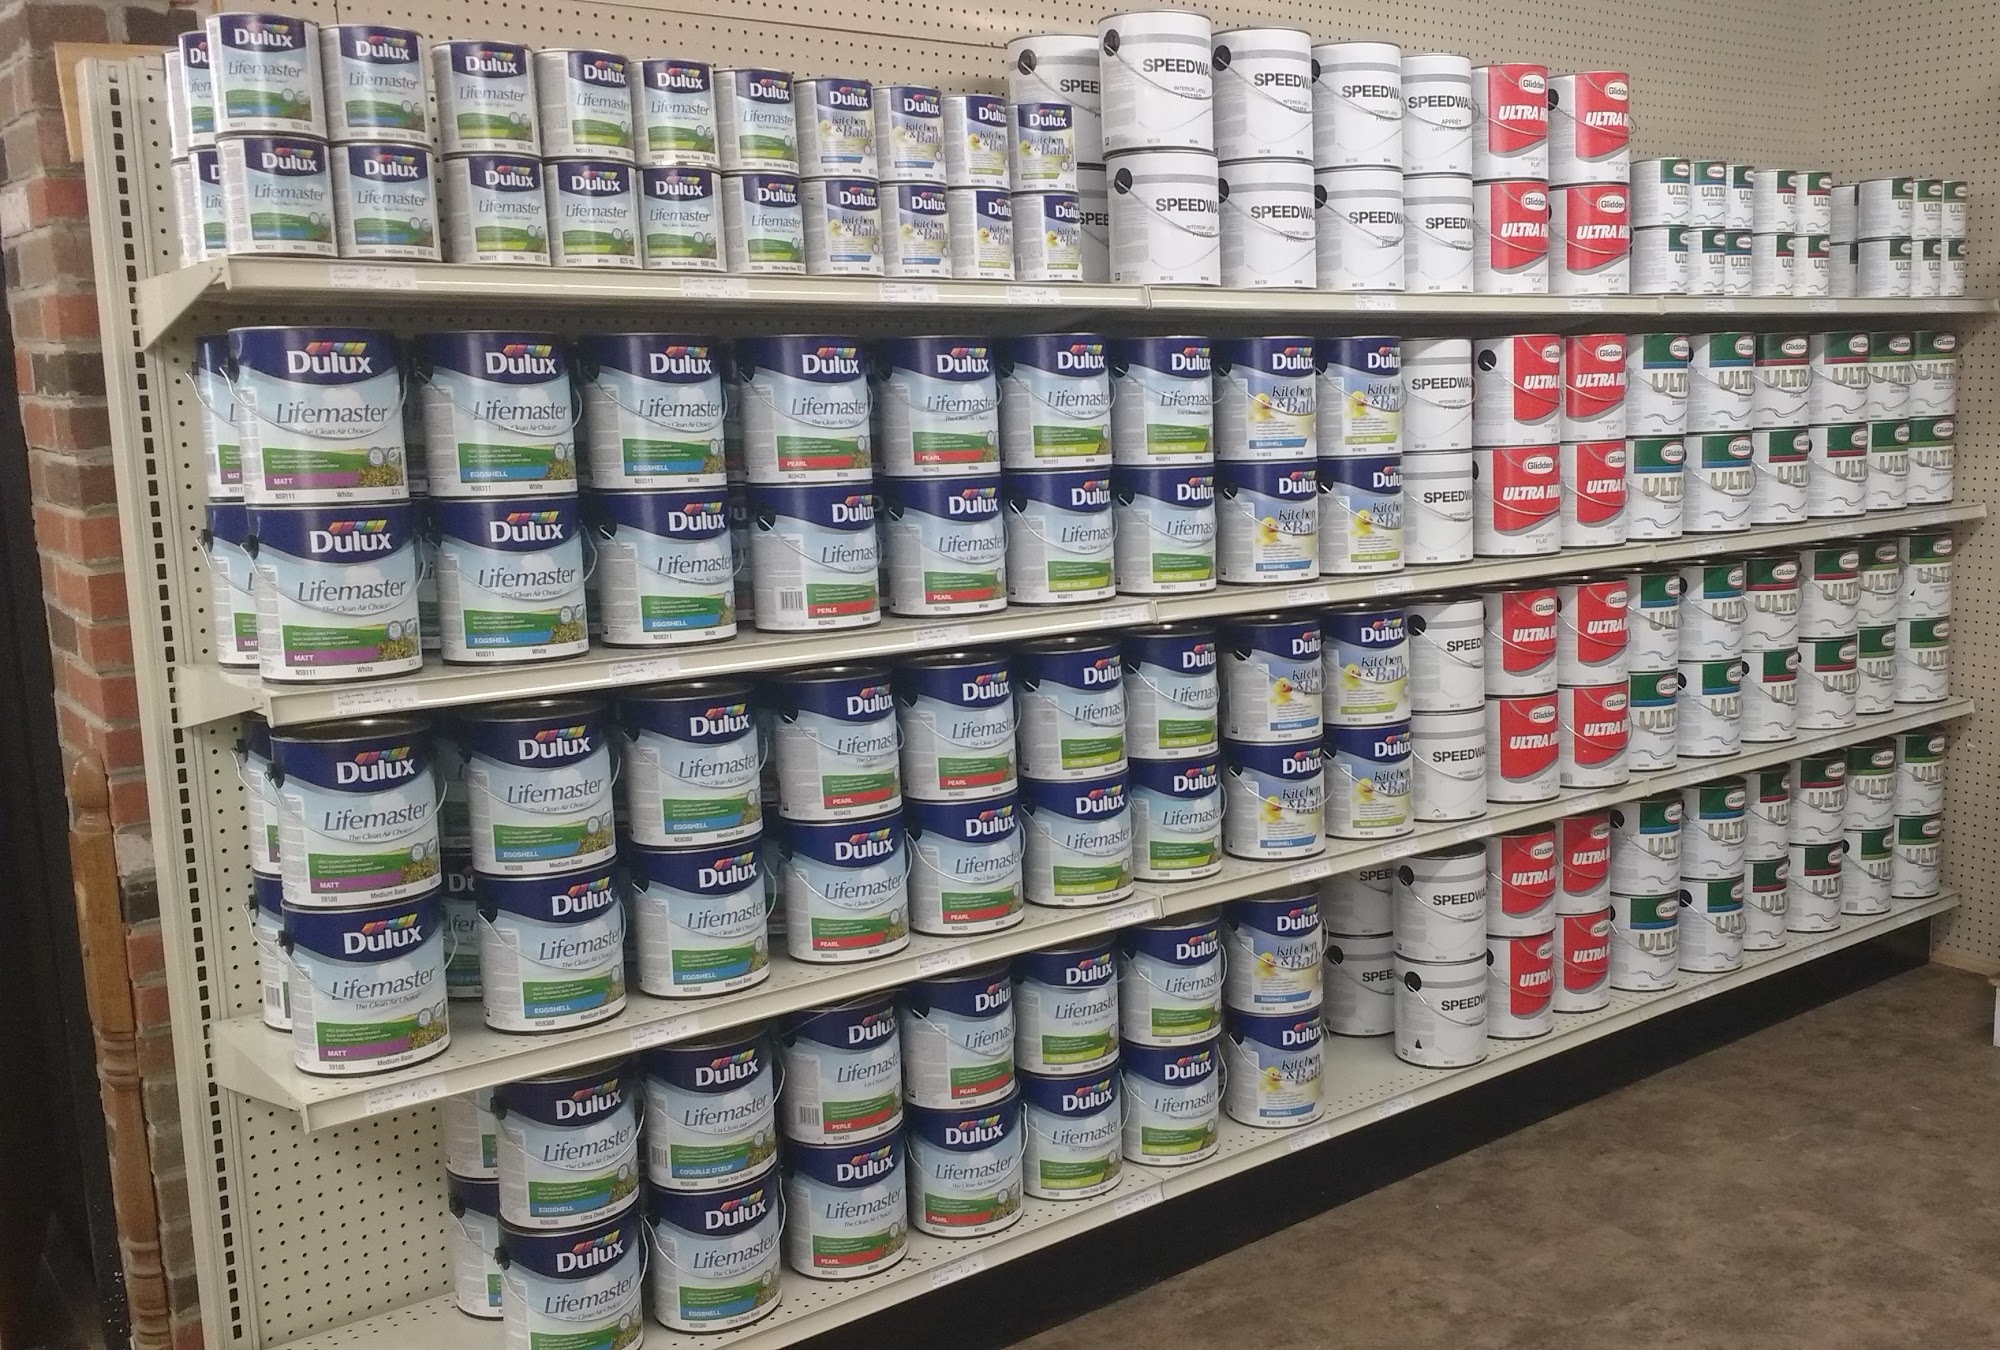 Allen's Locksmithing Paint and More 20898 Laplanche St, Amherst Nova Scotia B4H 3Y6